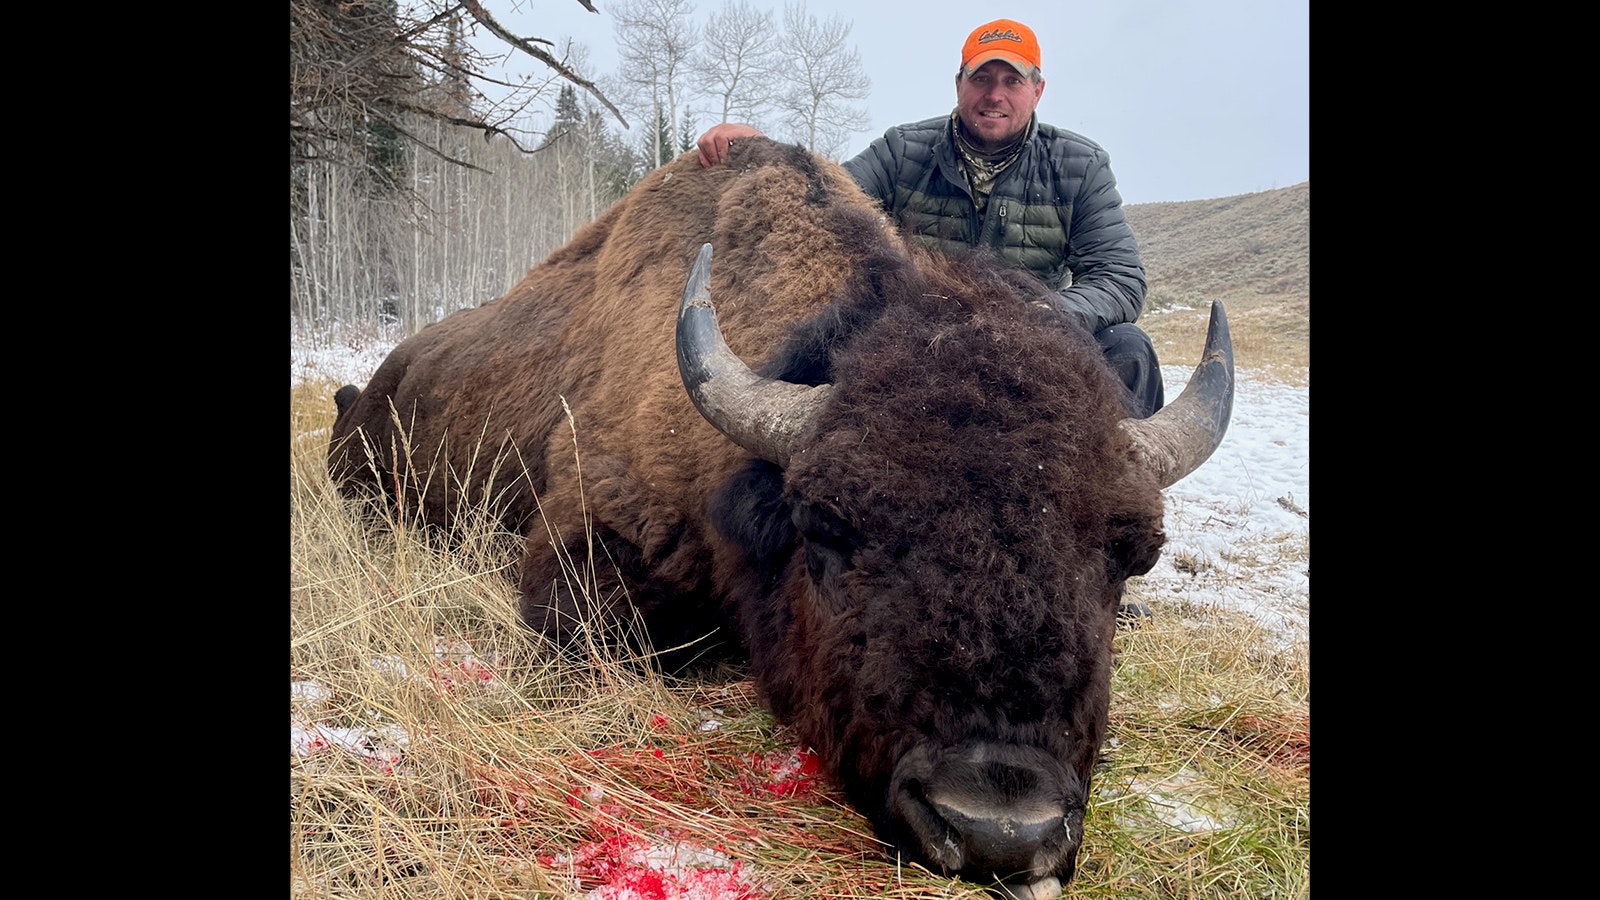 After waiting 14 years to draw a Wyoming bison hunting tag, Troy Jerup of Bondurant went on his dream hunt for wild bison this fall and bagged this trophy-sized bull.